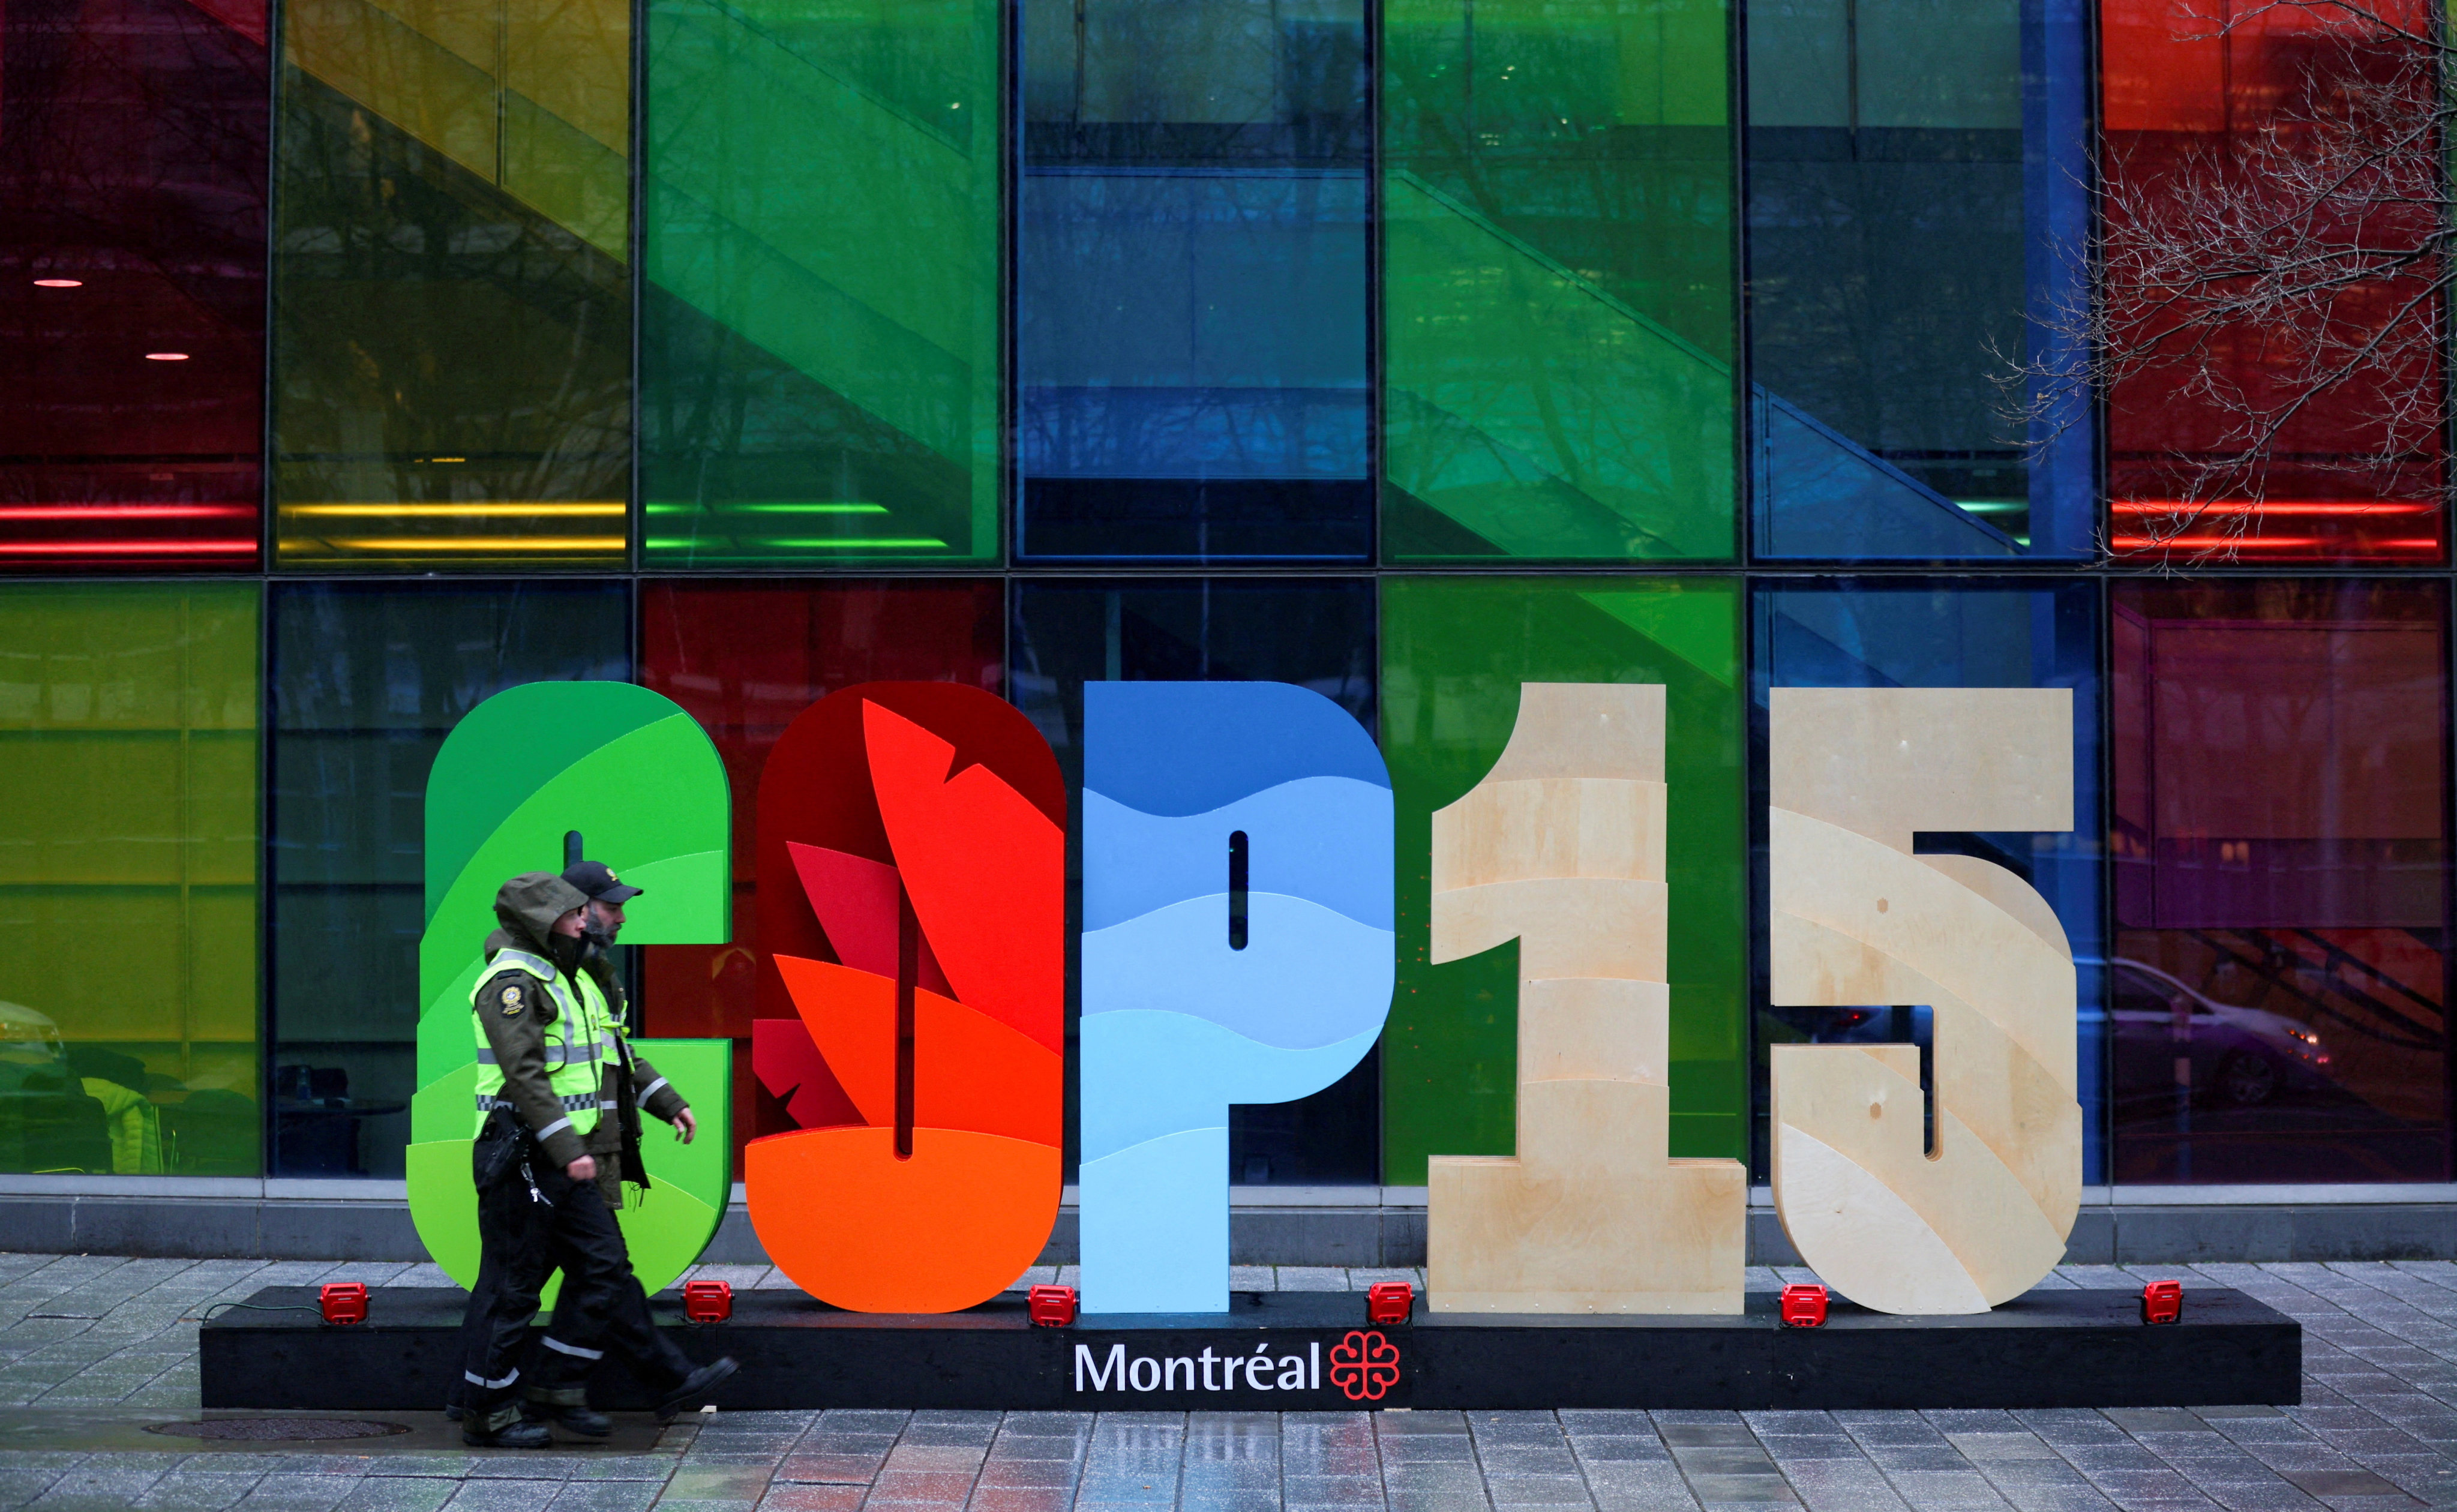 Police officers walk past a sign outside the Palais de Congres, during the COP15 UN biodiversity summit in Montreal, Quebec, Canada. Reuters